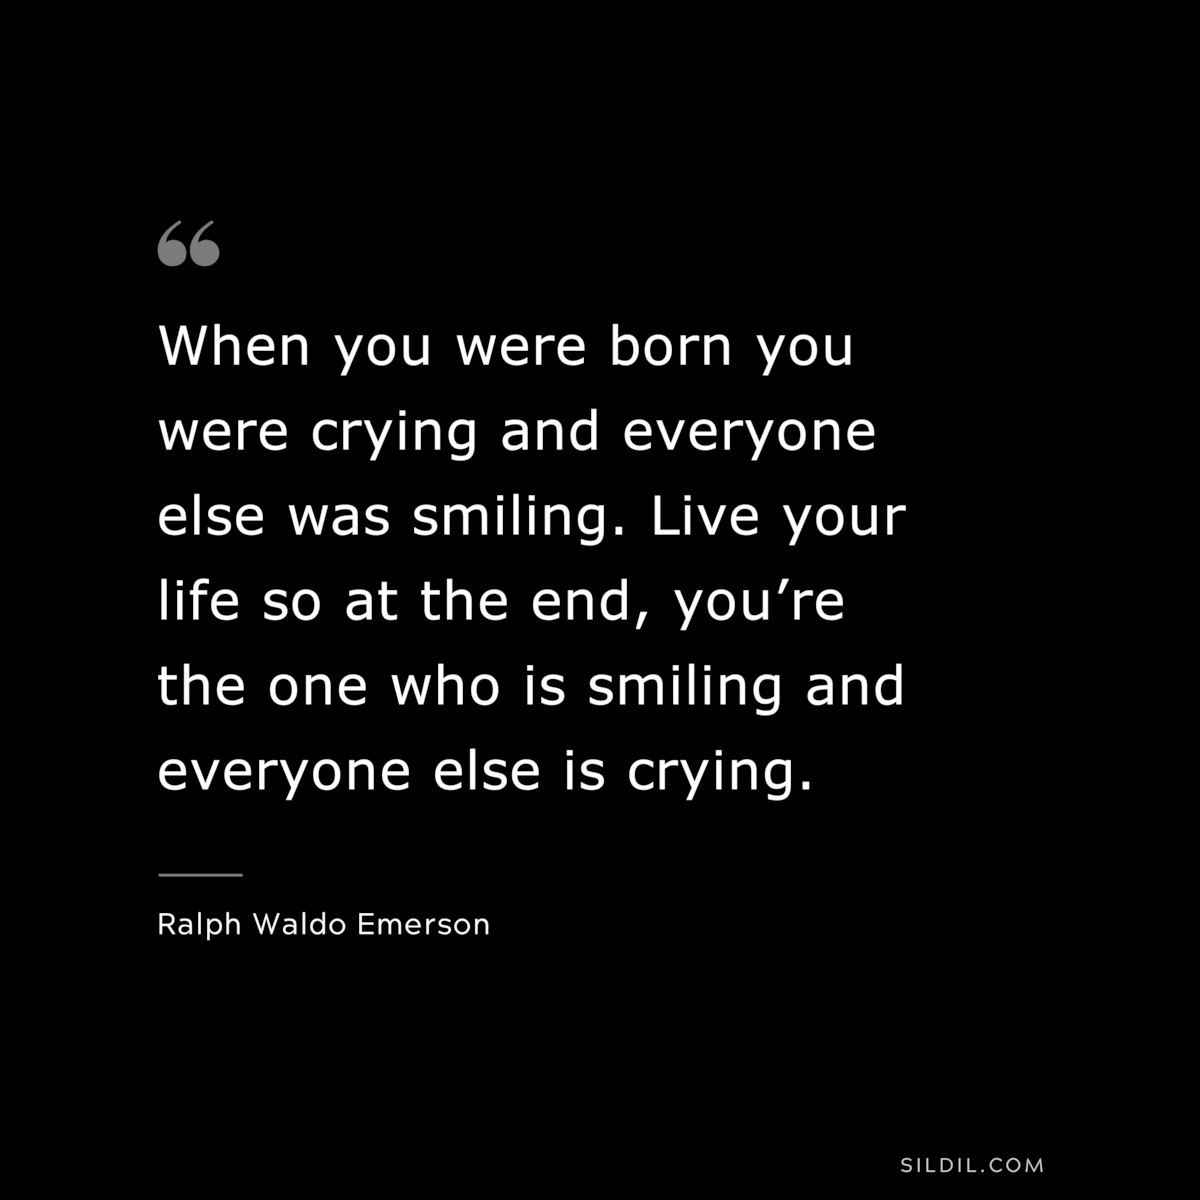 When you were born you were crying and everyone else was smiling. Live your life so at the end, you’re the one who is smiling and everyone else is crying. — Ralph Waldo Emerson